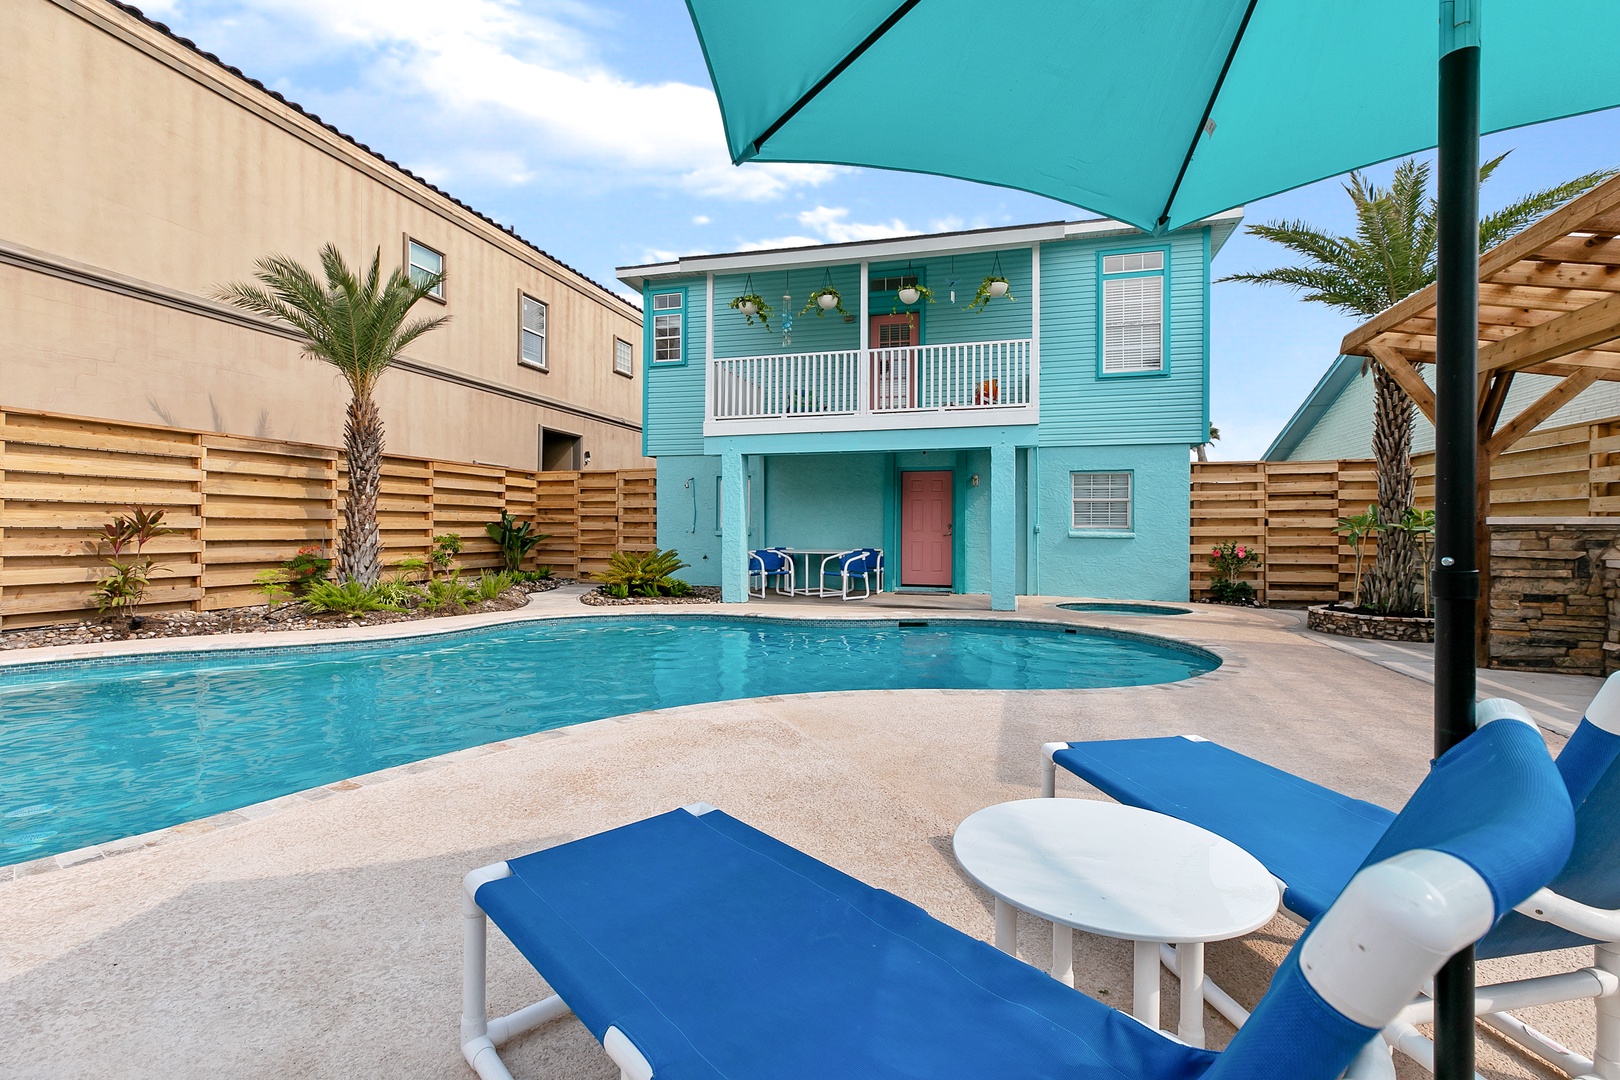 New! Luxury Beach House with Pool, Hot Tub and Grilling Station!